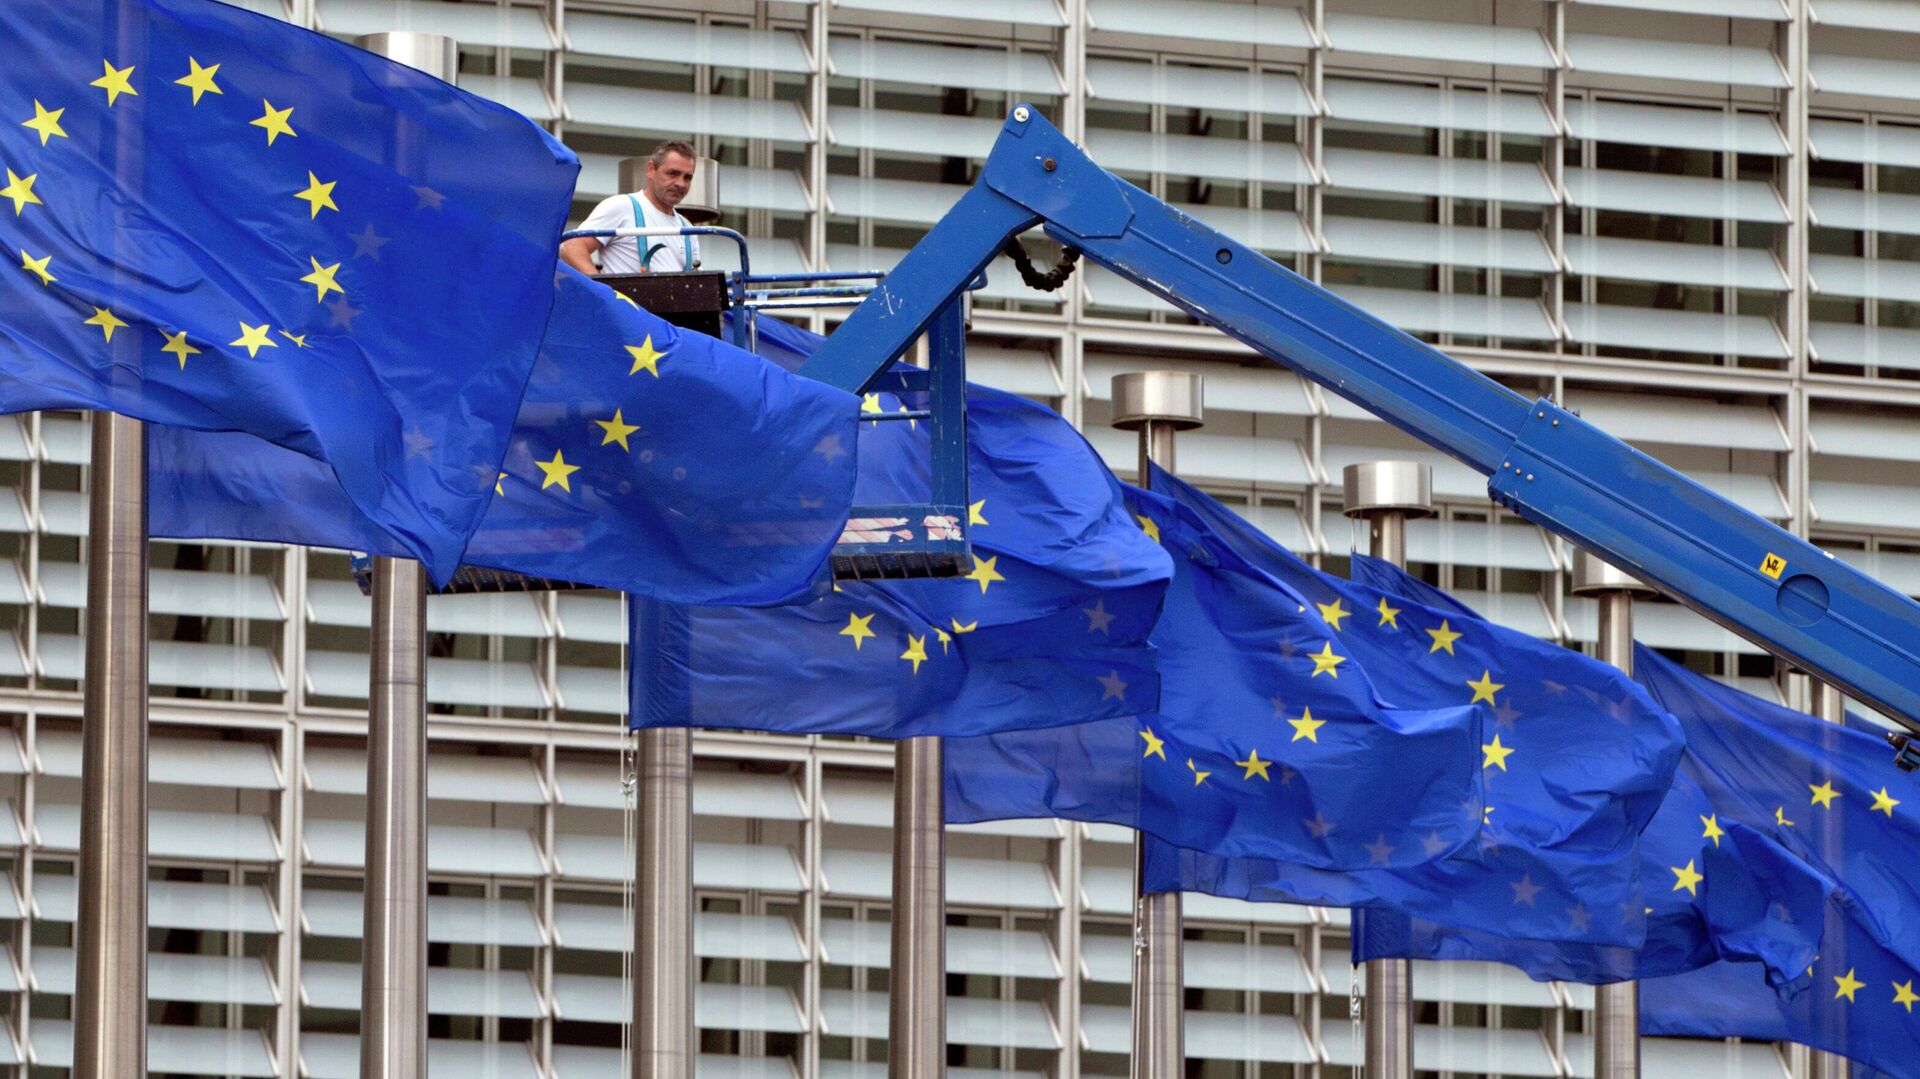 FILE- In this June 23, 2016 file photo, a worker on a lift adjusts the EU flags in front of EU headquarters in Brussels - Sputnik International, 1920, 05.06.2022